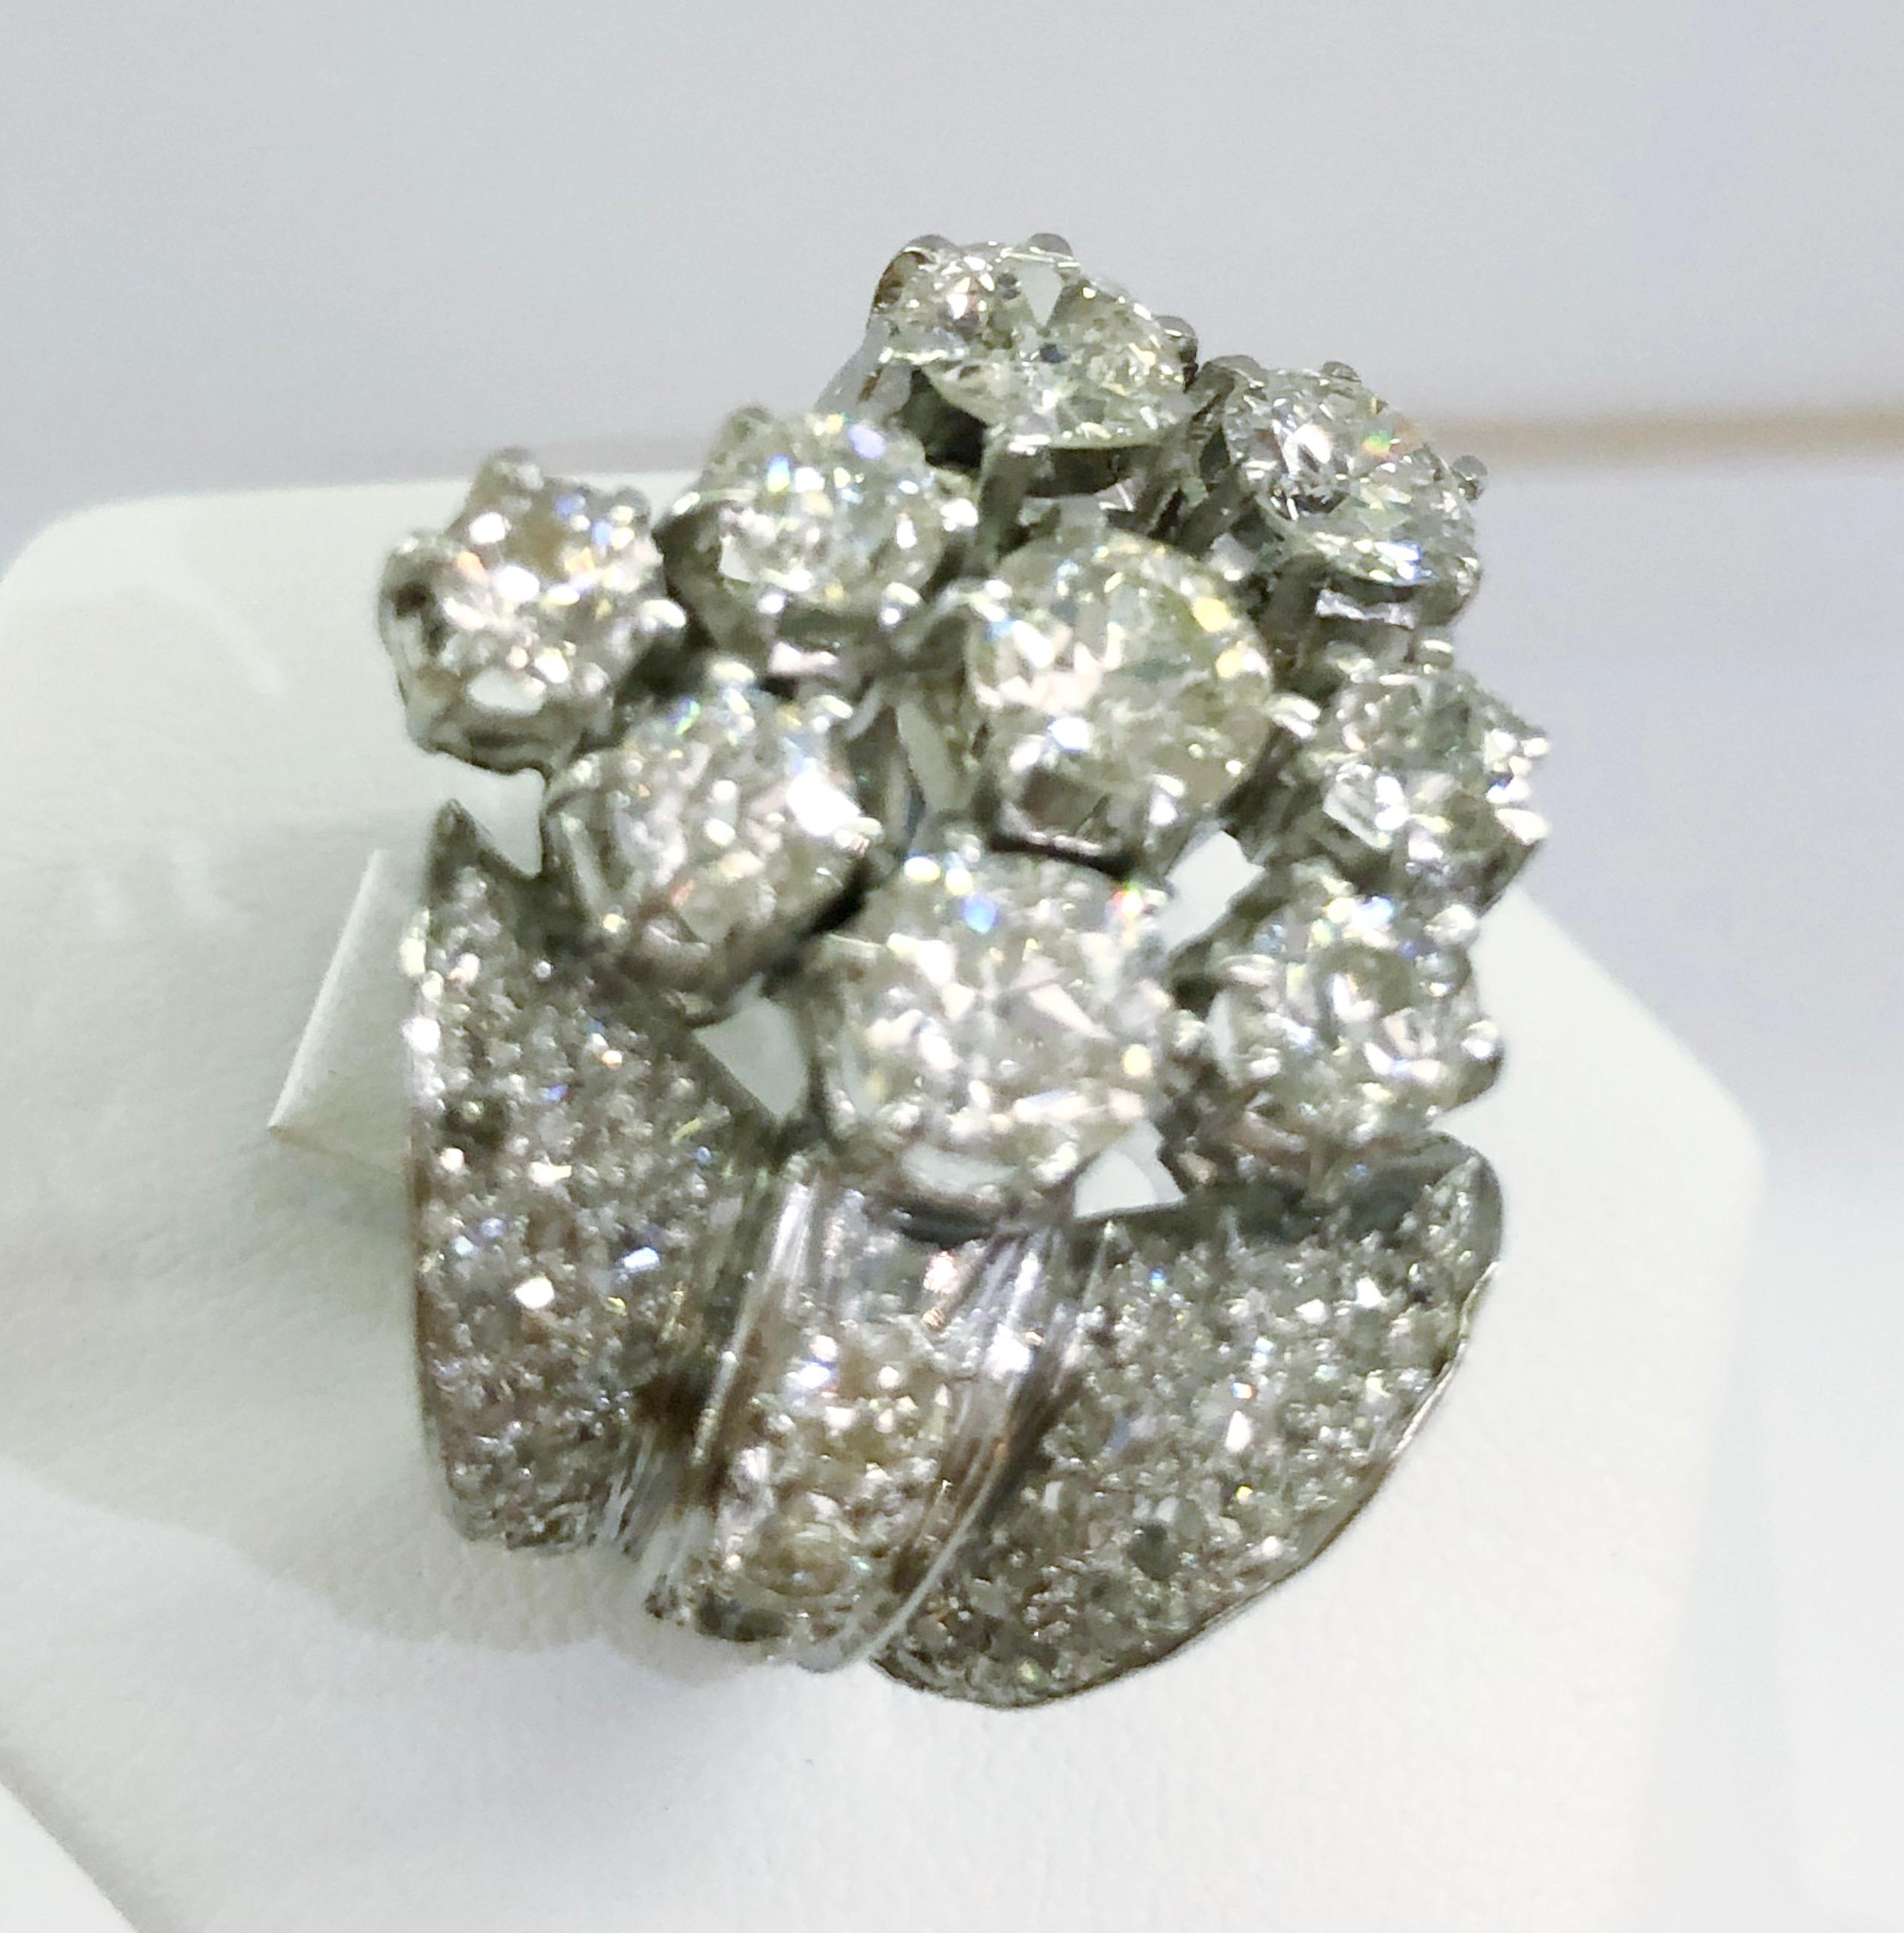 Vintage platinum ring with 9 large brilliant diamonds resembling a flower and small brilliant diamonds resembling leaves for a total of 3.5 karats, Italy 1960s
Ring size US 7.5